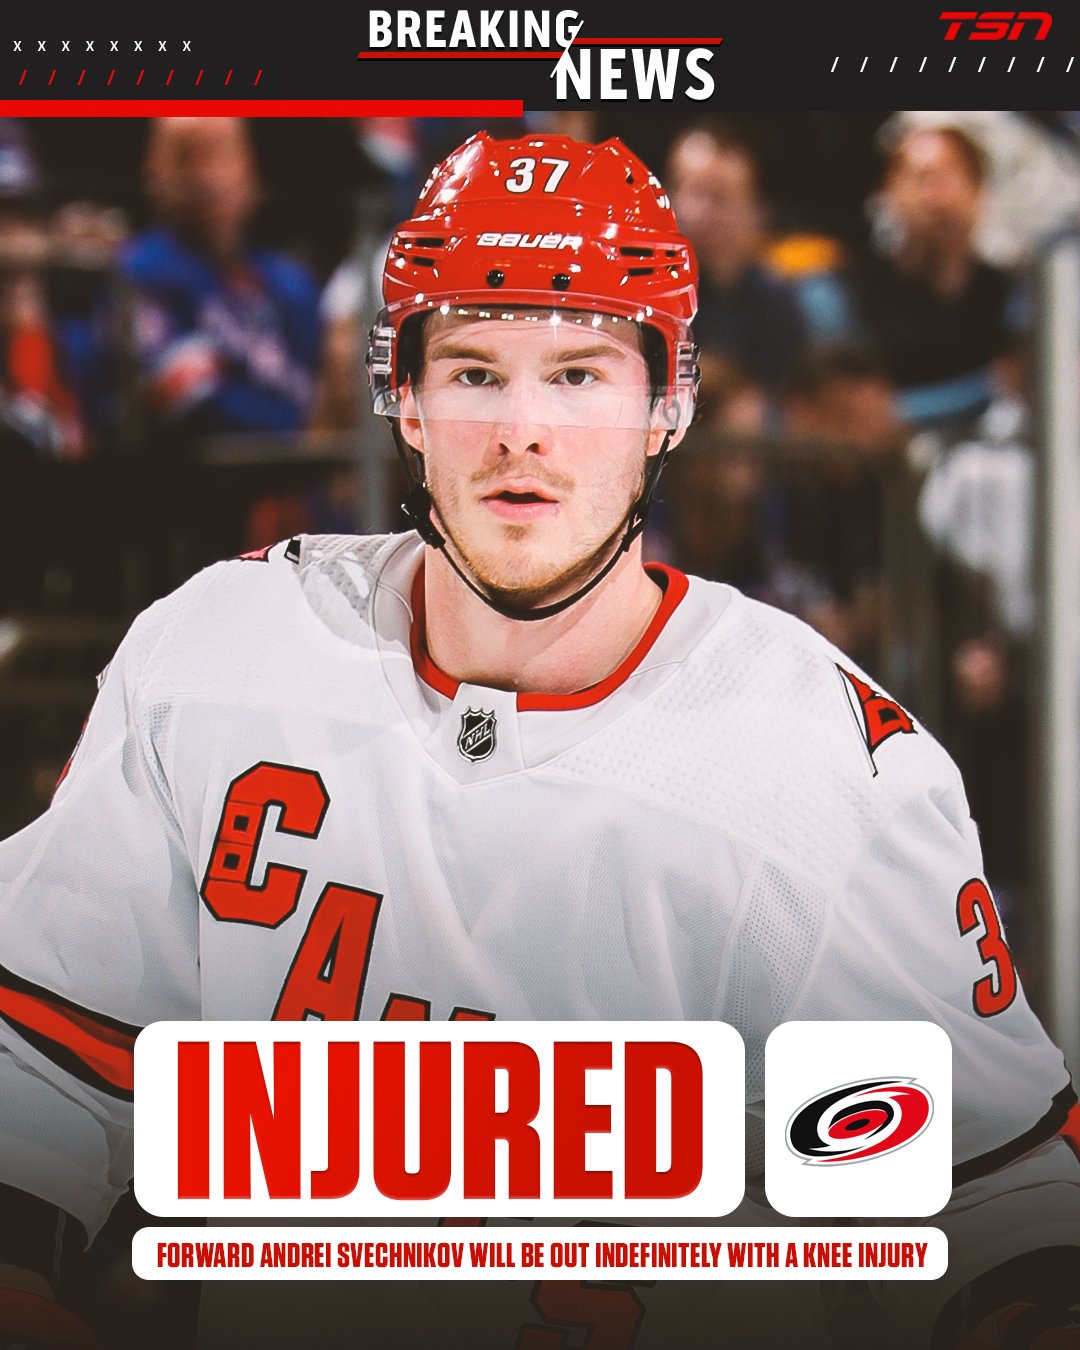 NHL: Hurricanes' Andrei Svechnikov out for season with knee injury